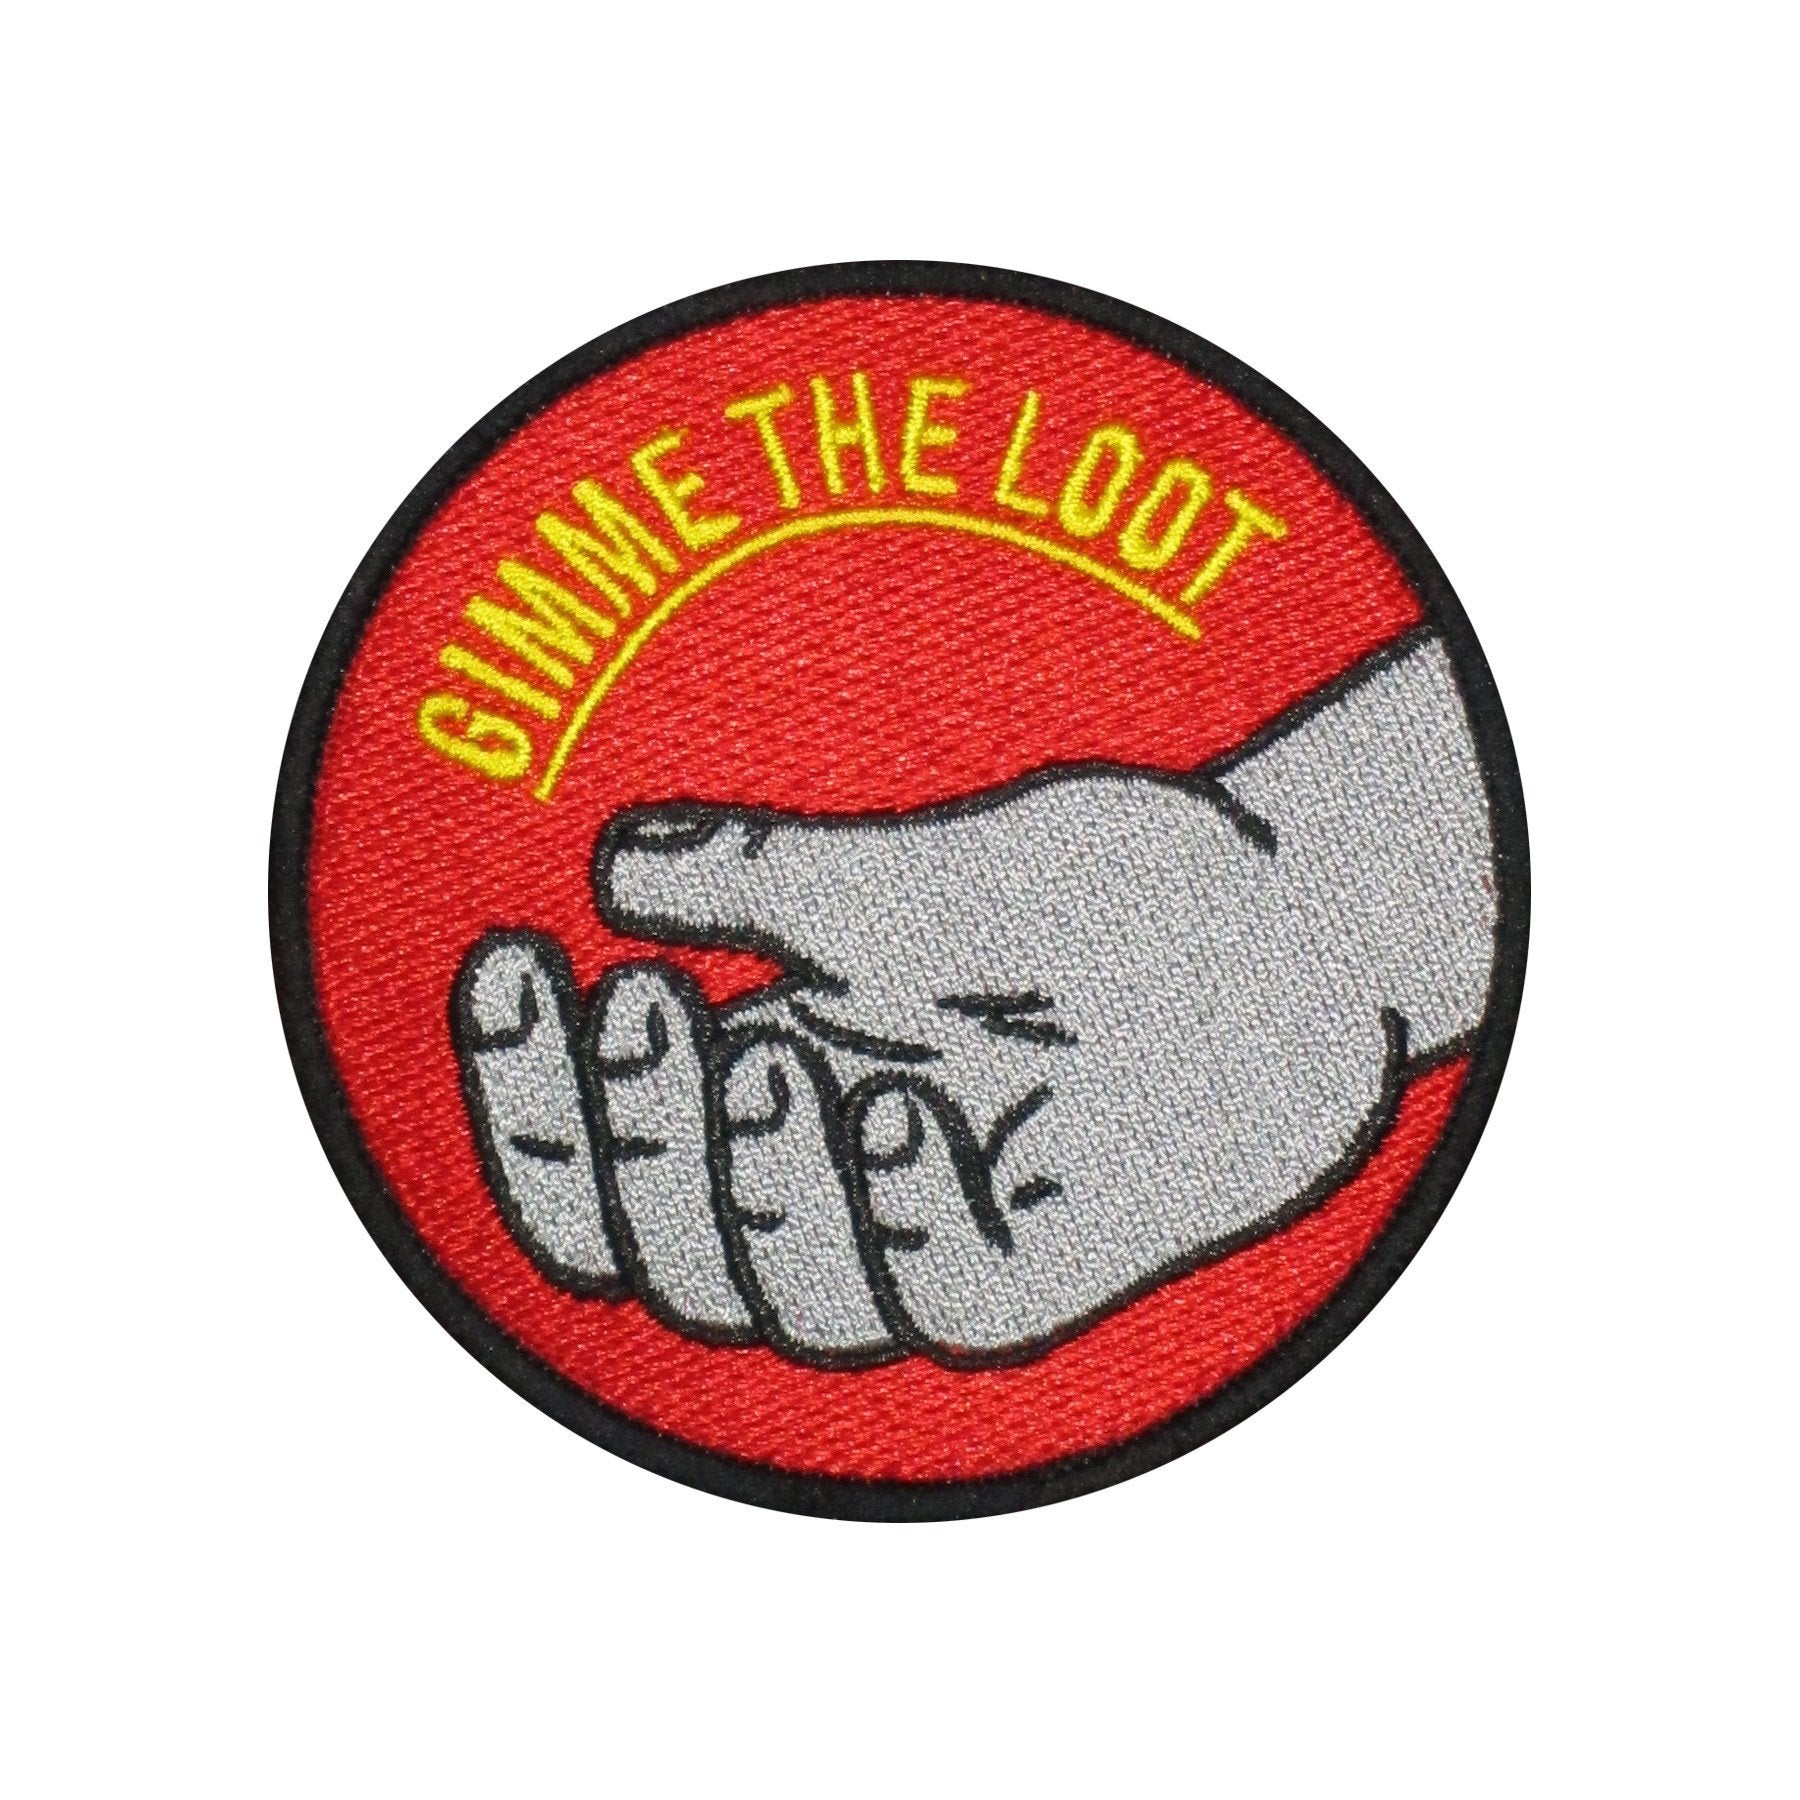 The "Gimme the Loot" embroidered iron-on patch. 3" diameter patch with hand out stretched and text that reads "gimme the loot". Silver hand, yellow text, red background.